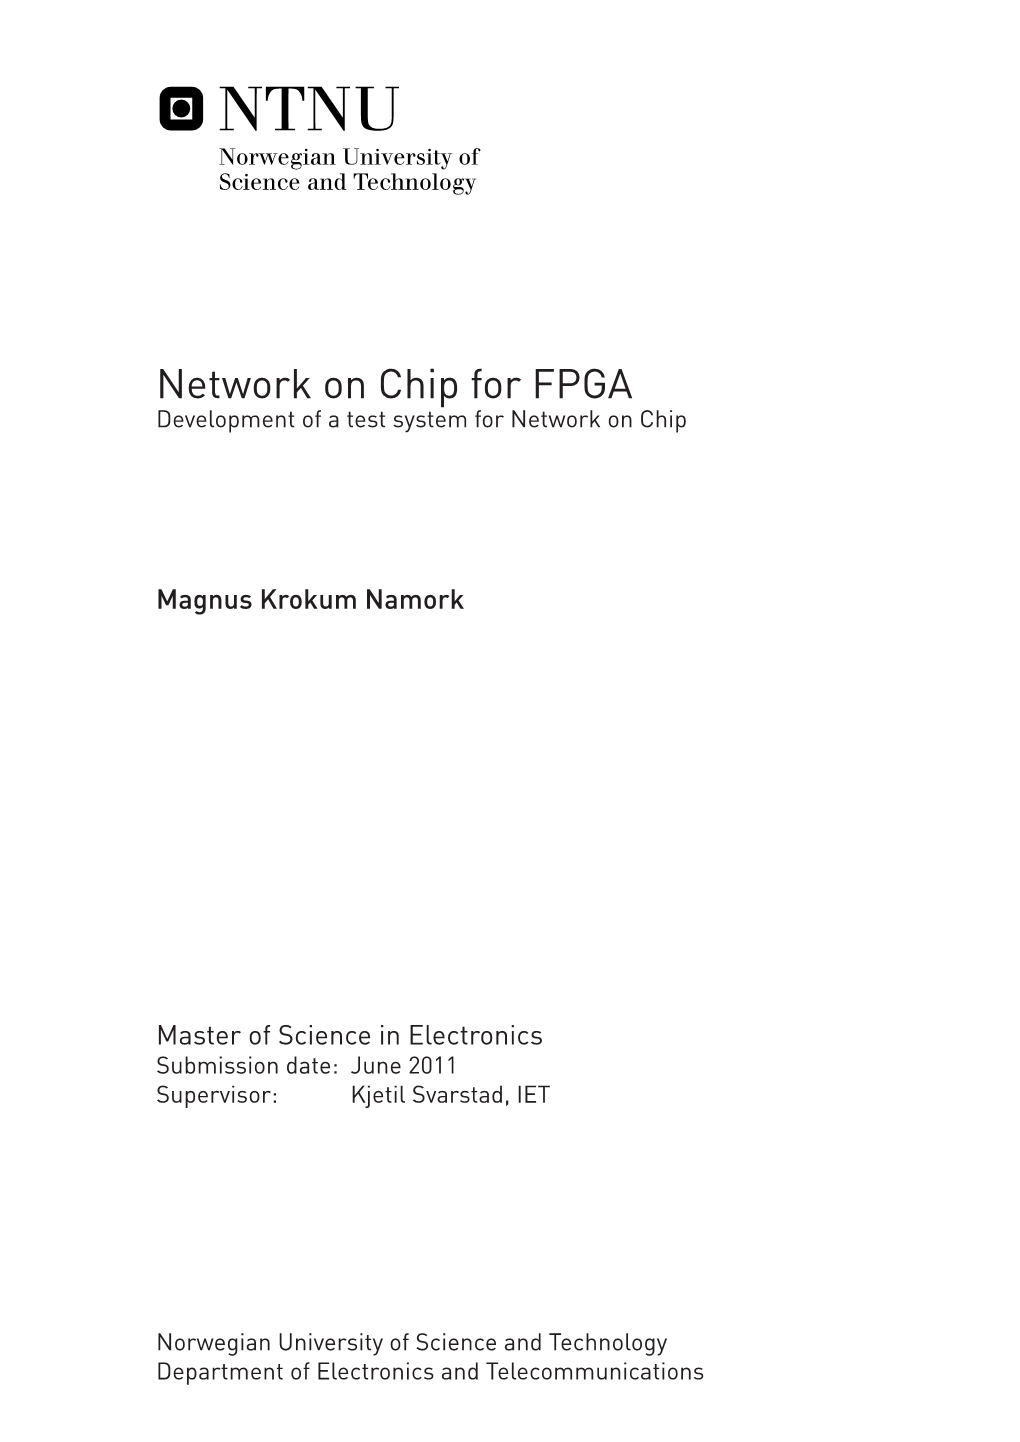 Network on Chip for FPGA Development of a Test System for Network on Chip